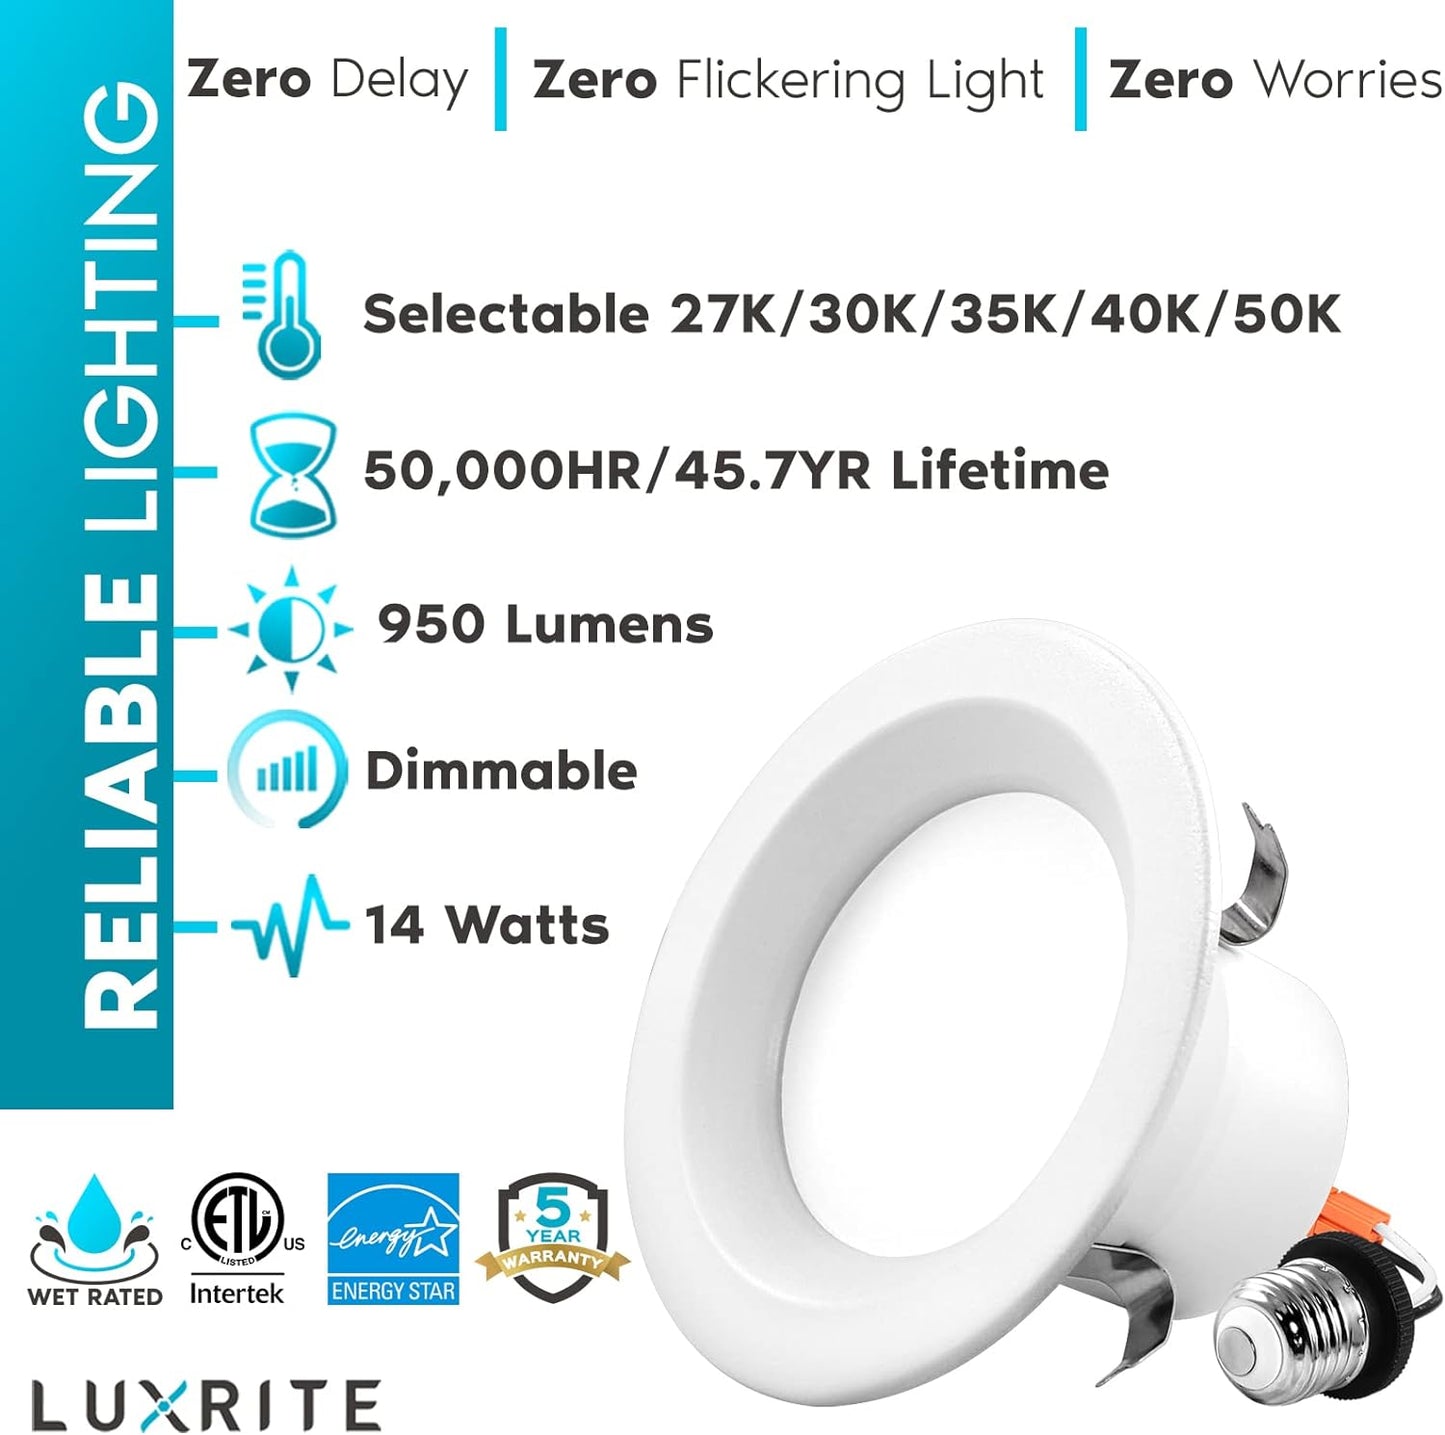 LUXRITE 16-Pack 4 Inch LED Recessed Can Lights, 14W=75W, 5 Color Options 2700K-5000K, 950 Lumens, Dimmable LED Retrofit Kit, Wet Rated, IC Rated, Recessed Ceiling Lights, Energy Star, ETL List